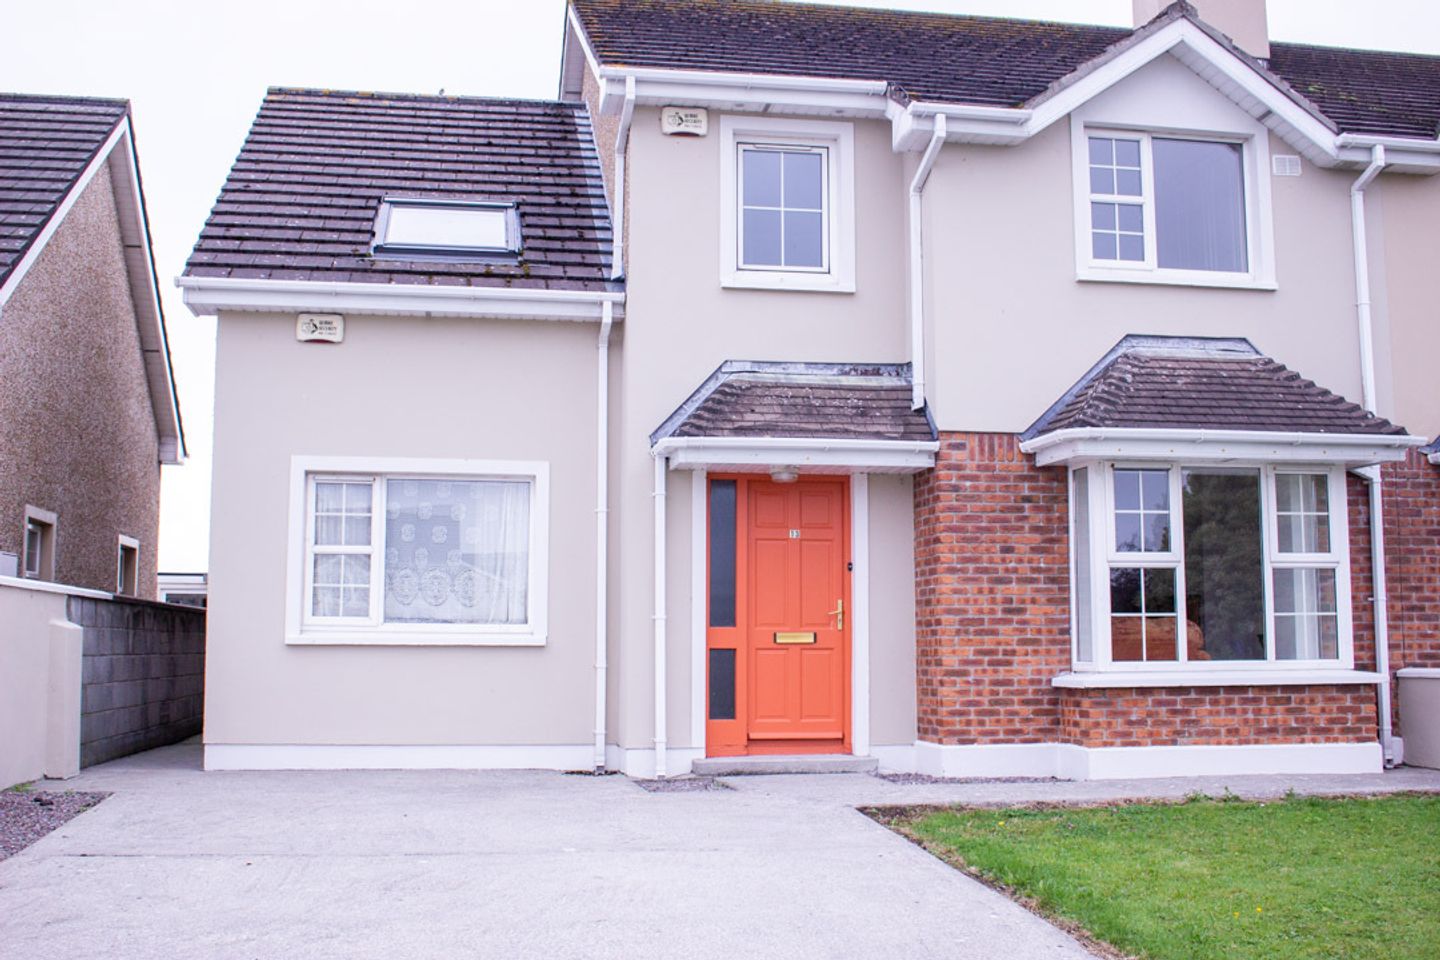 13 The Forge, Ballygologue Road, Listowel, Co. Kerry